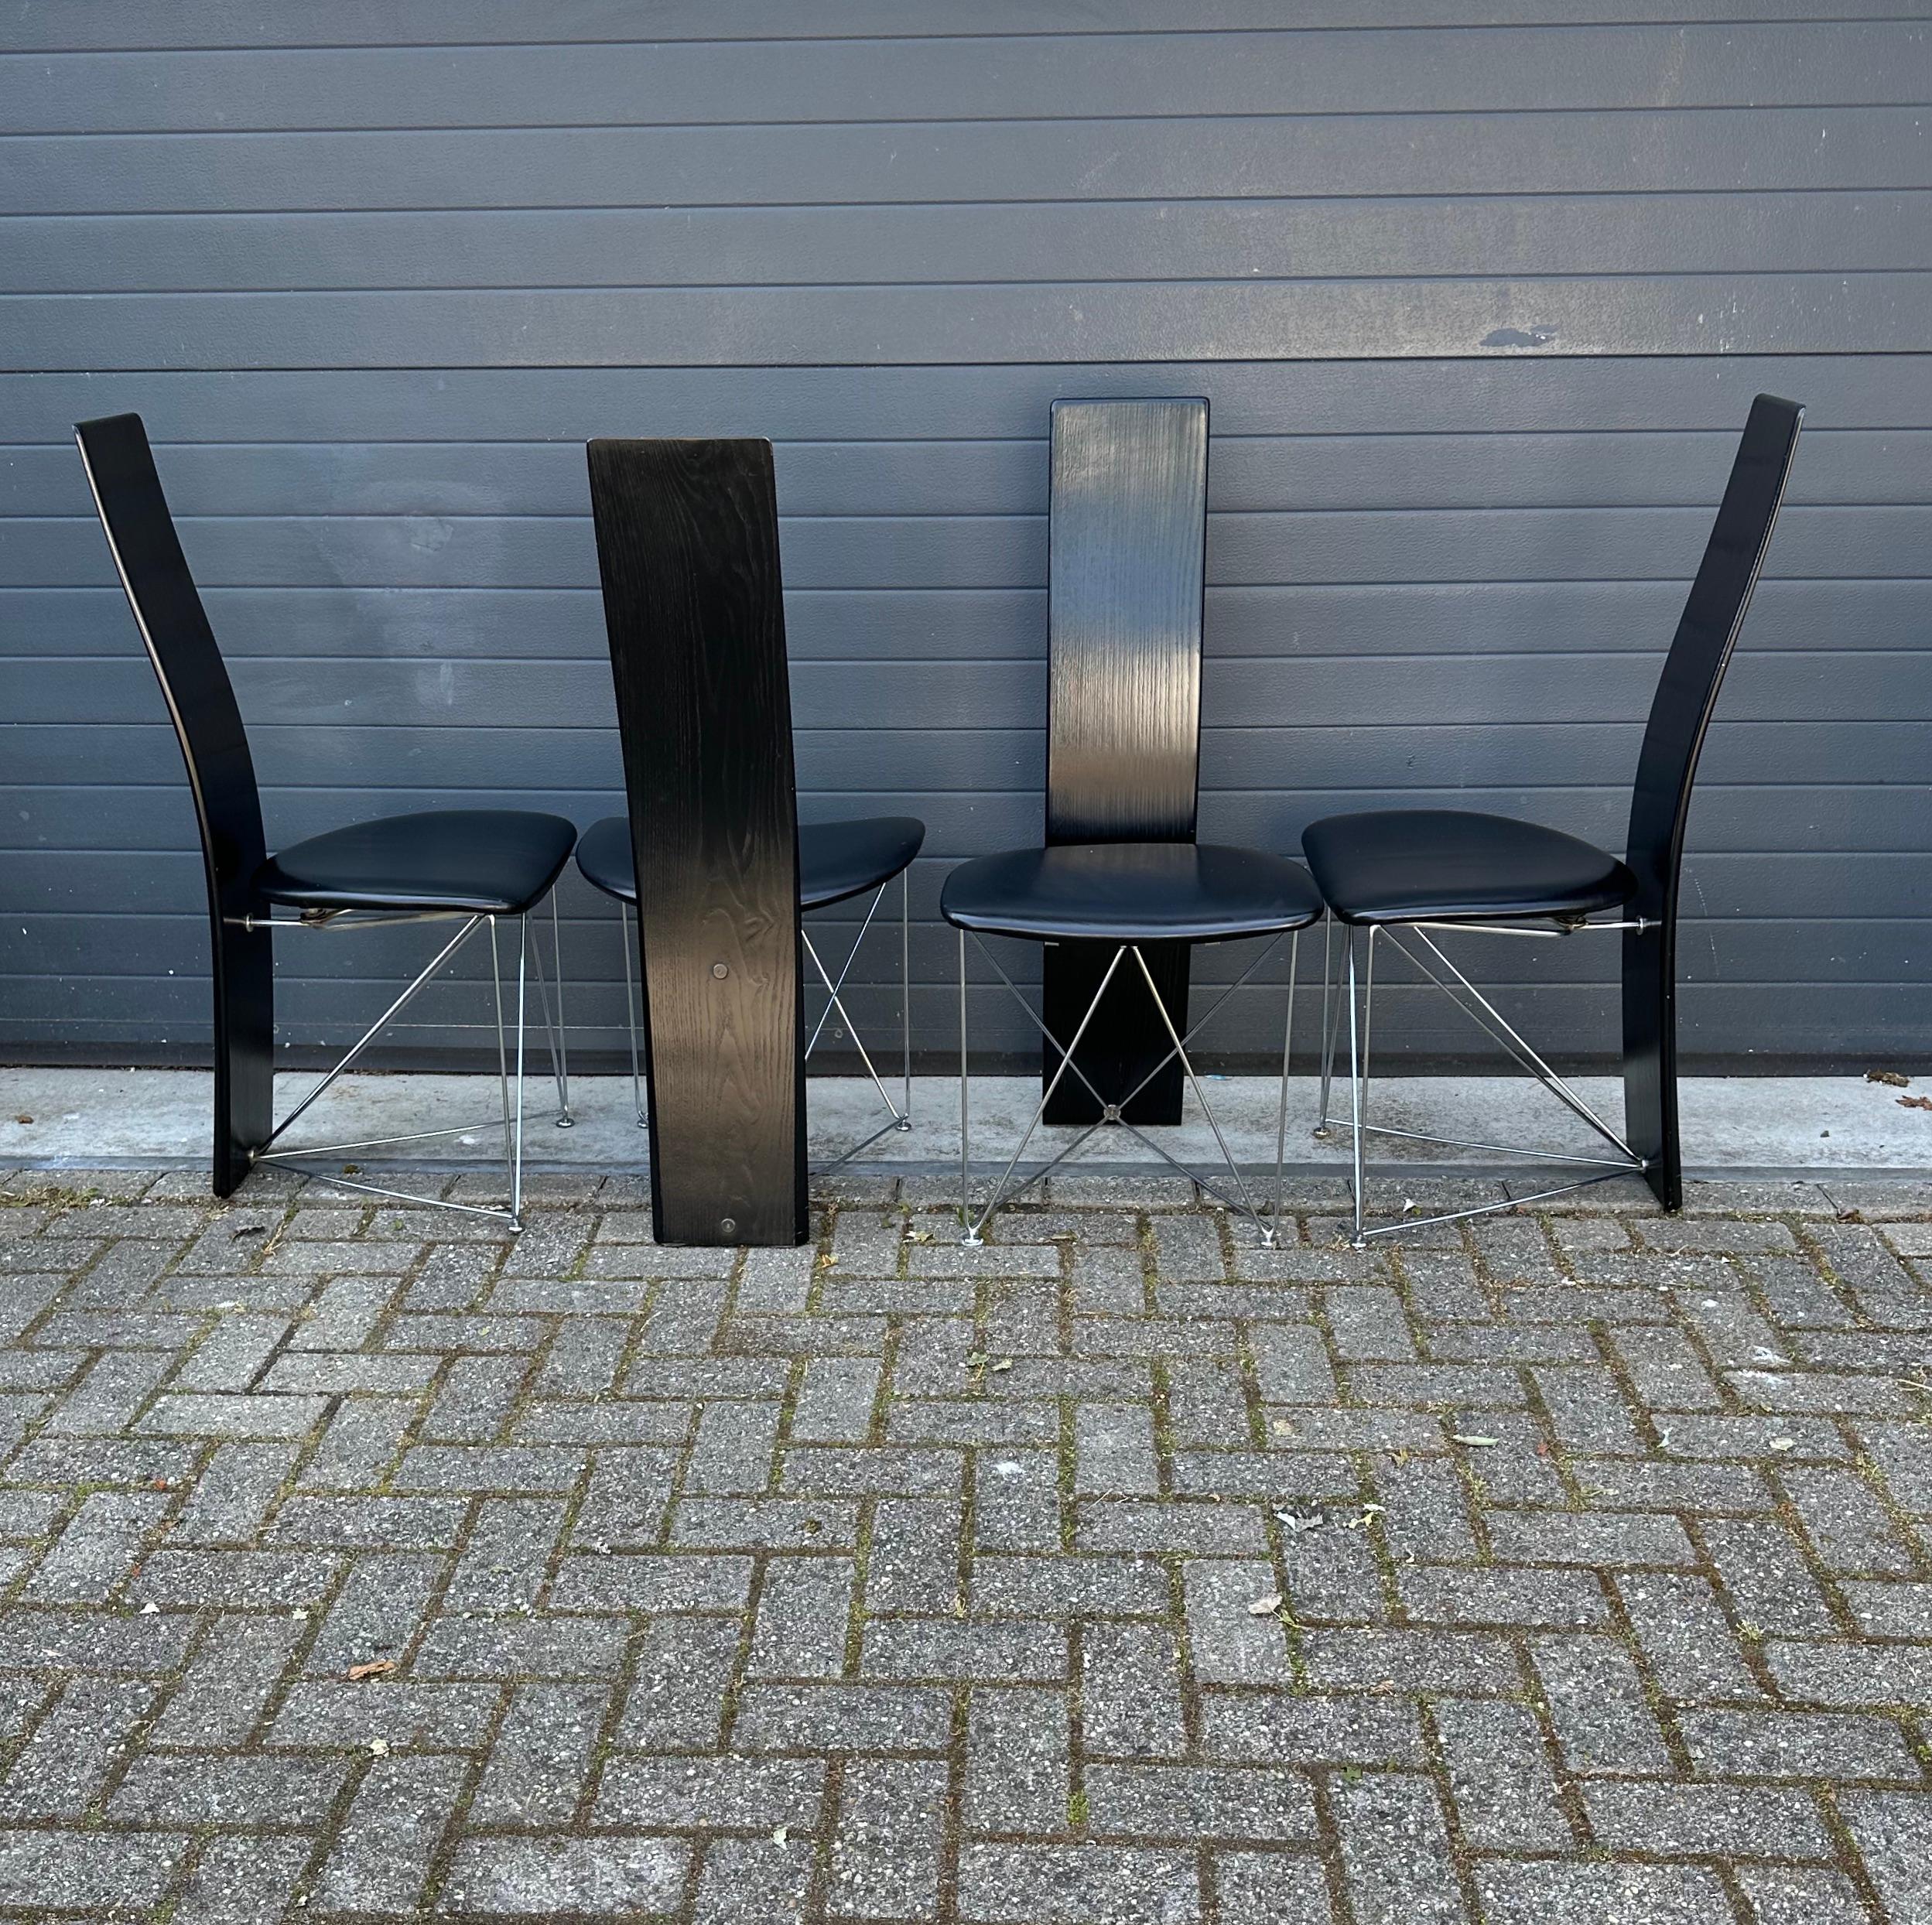 The Moderns Set of 4 Dining Chairs with Leather Seats by Torstein Flatøy for Bahus en vente 9